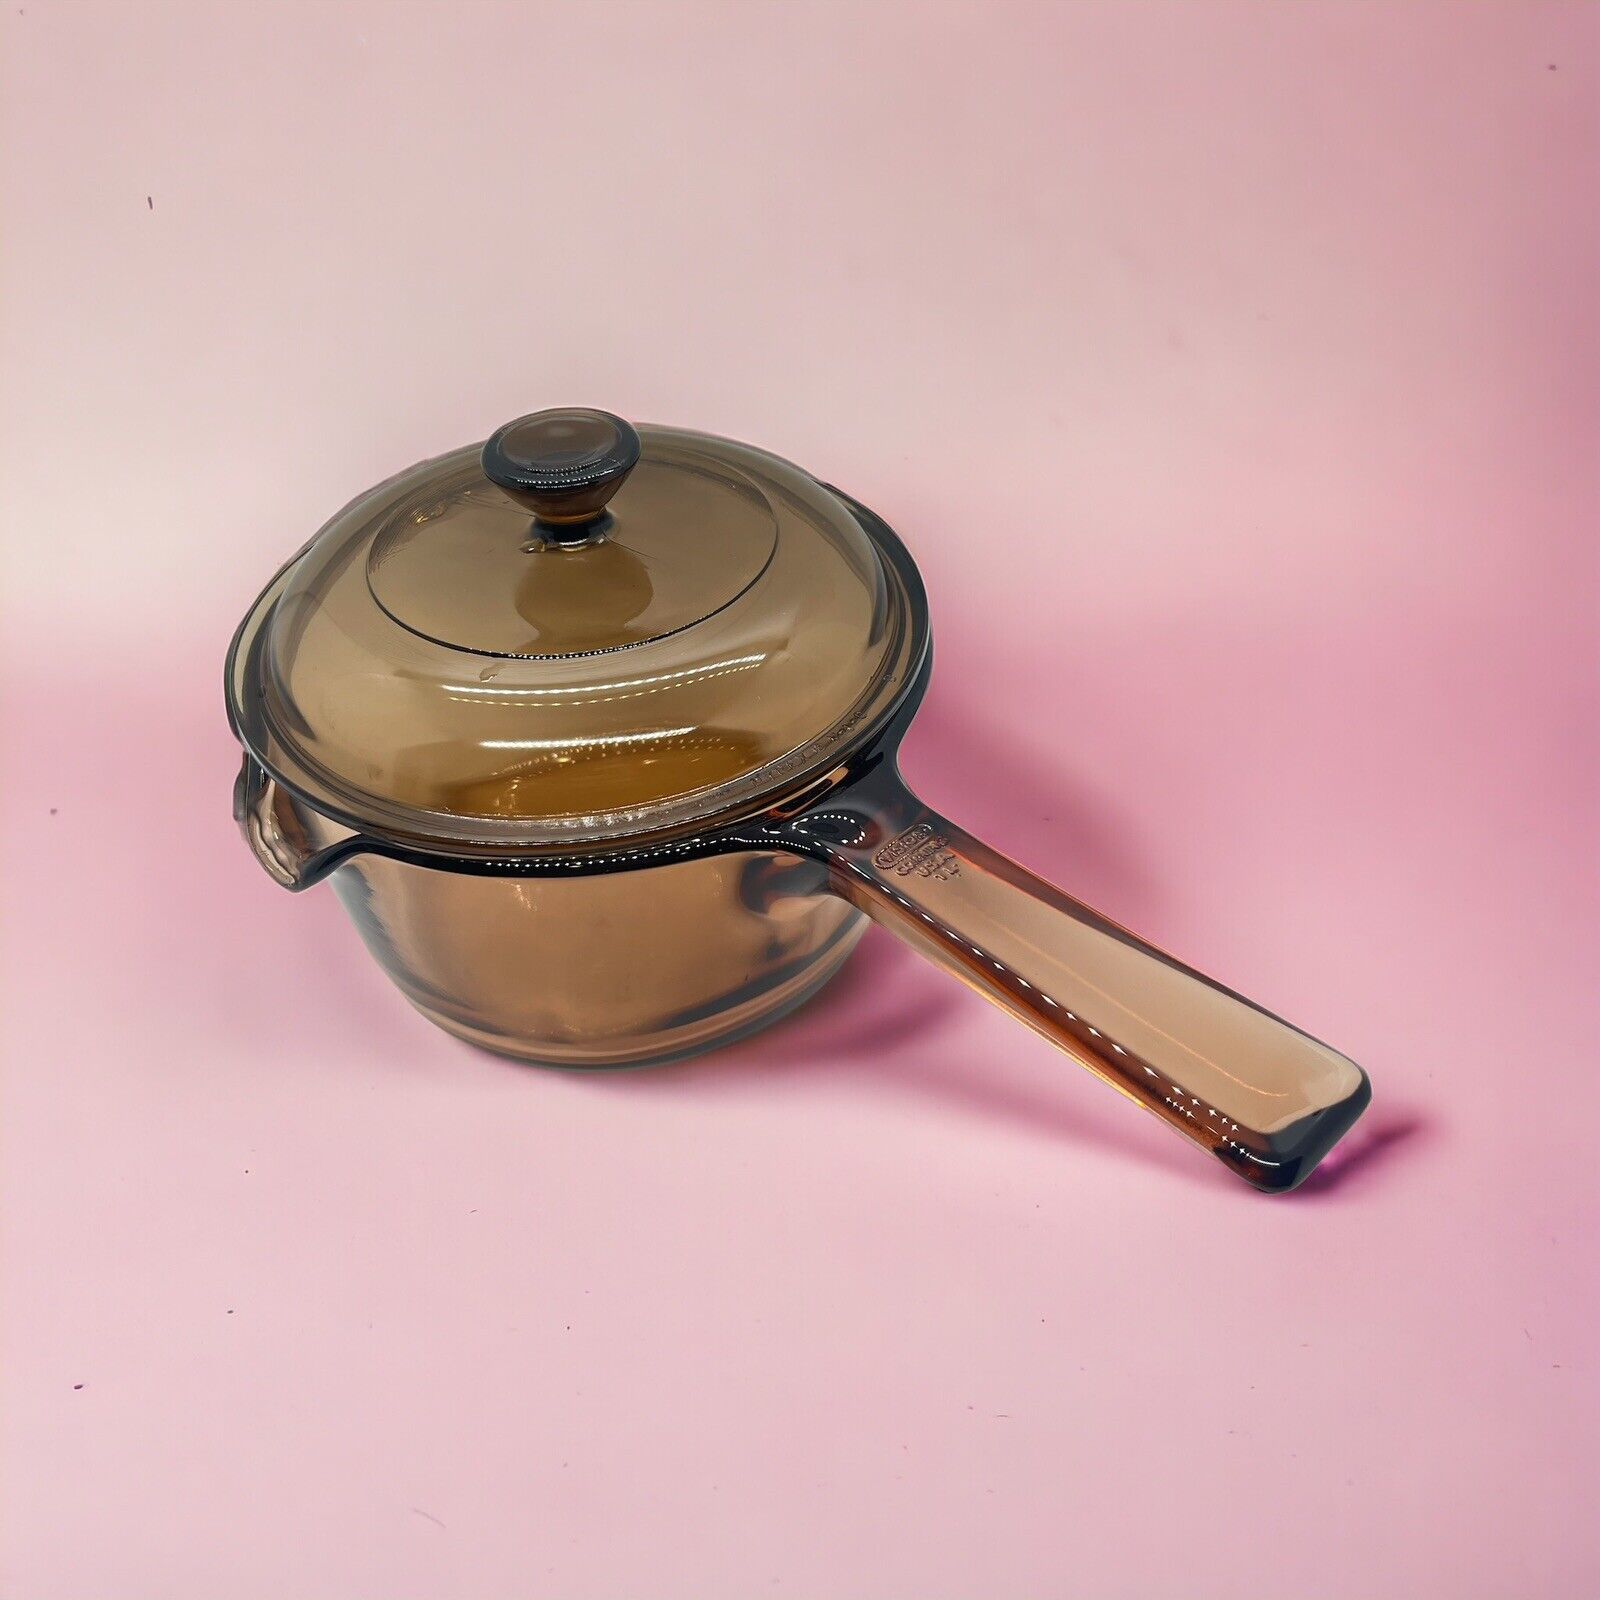 Vintage Corning Visions Vision Ware Amber Cookware 1 L Saucepan with Lid